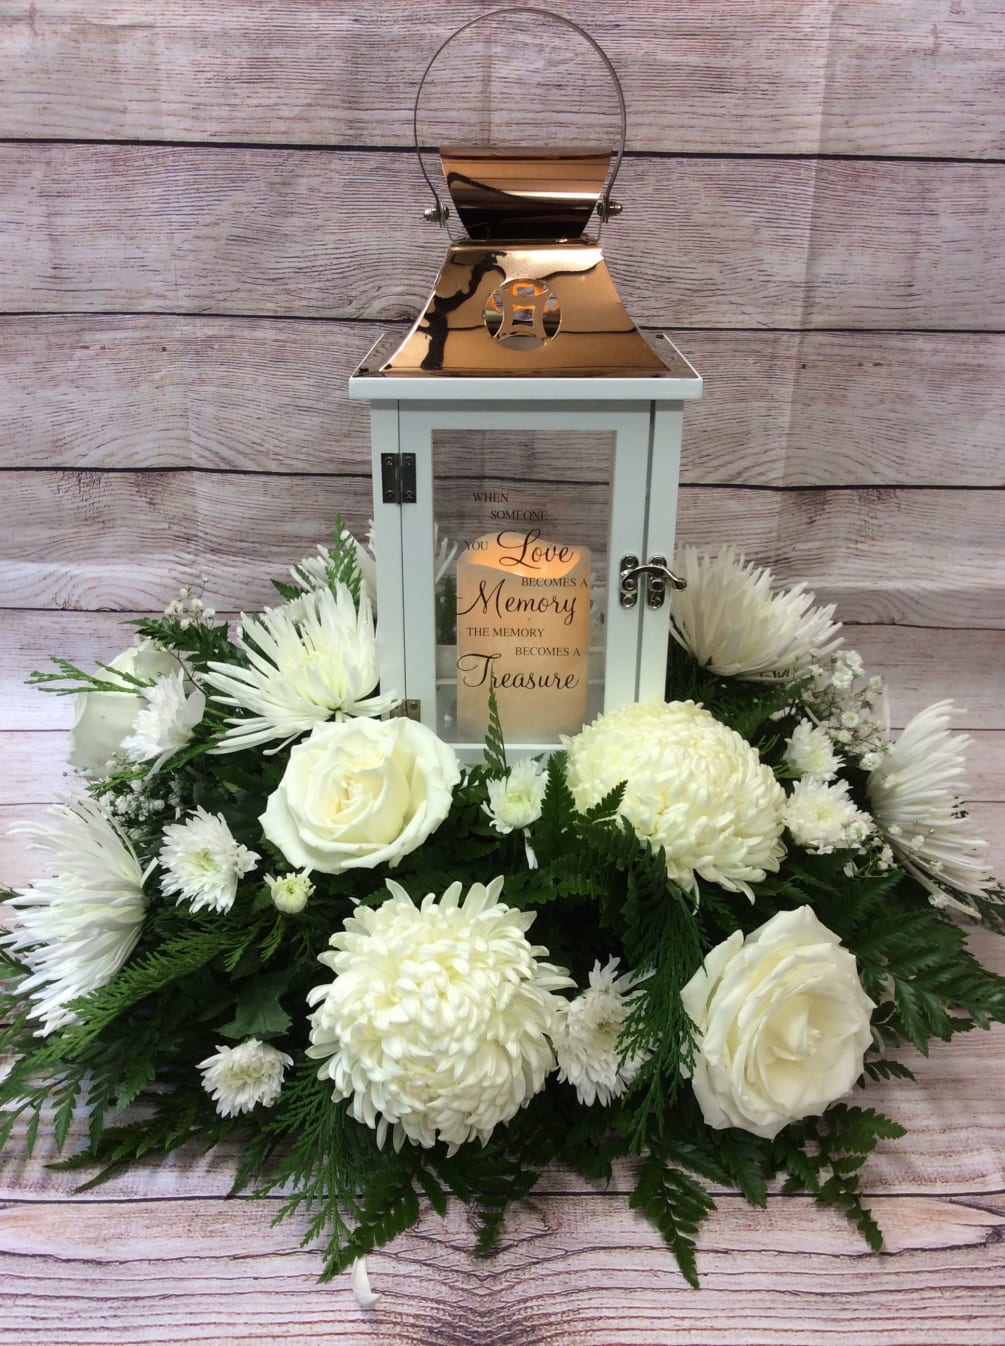 All white blooms surrounding a beautiful keepsake lantern with varying sentiments. All